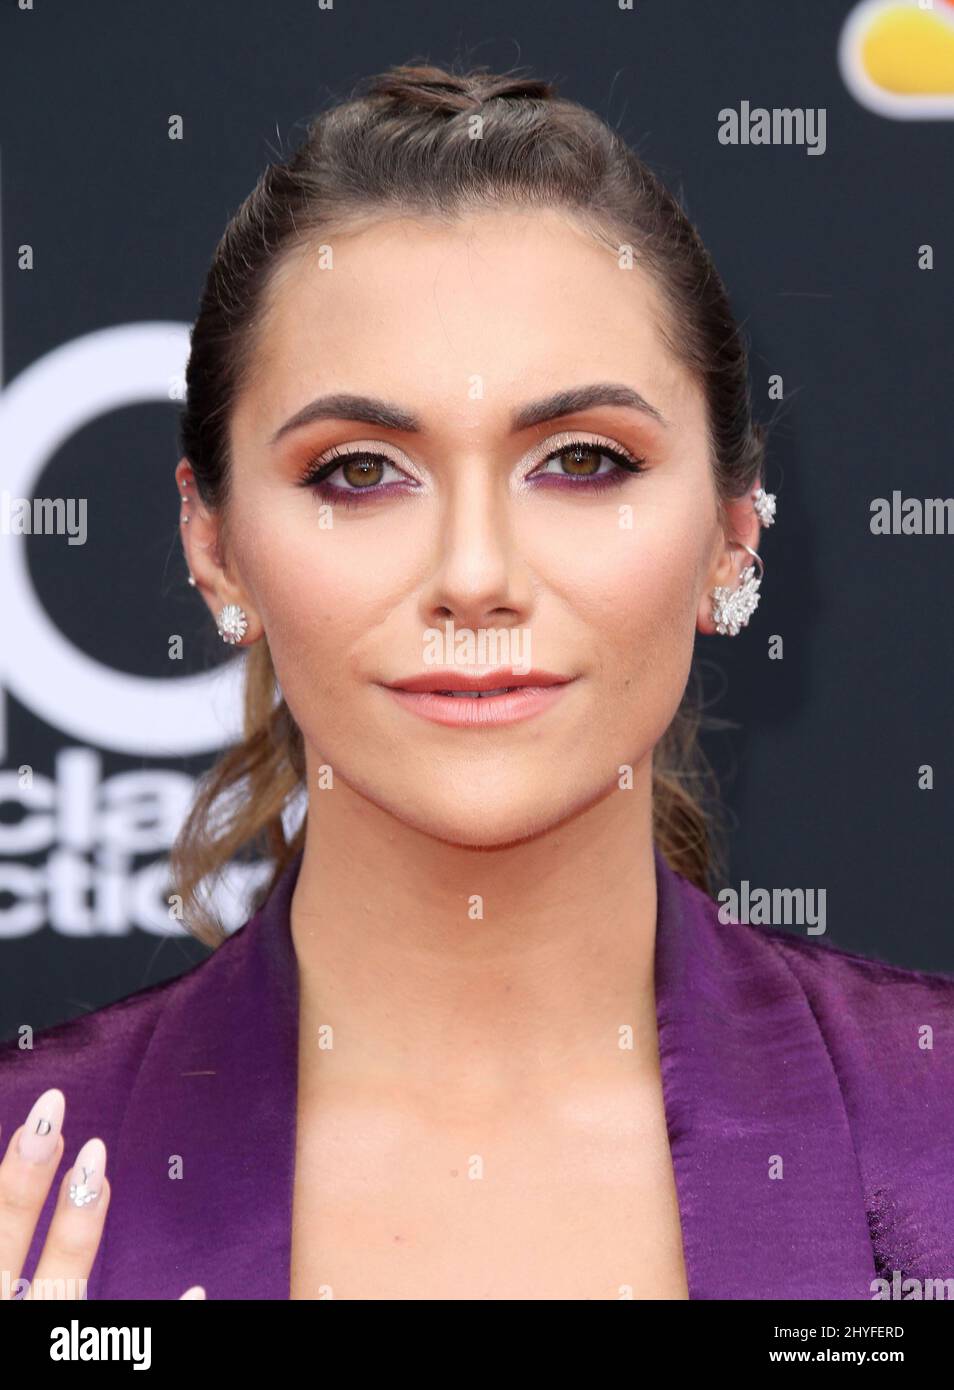 Alyson Stoner at the 2018 Billboard Music Awards held at the MGM Grand Garden Arena Stock Photo